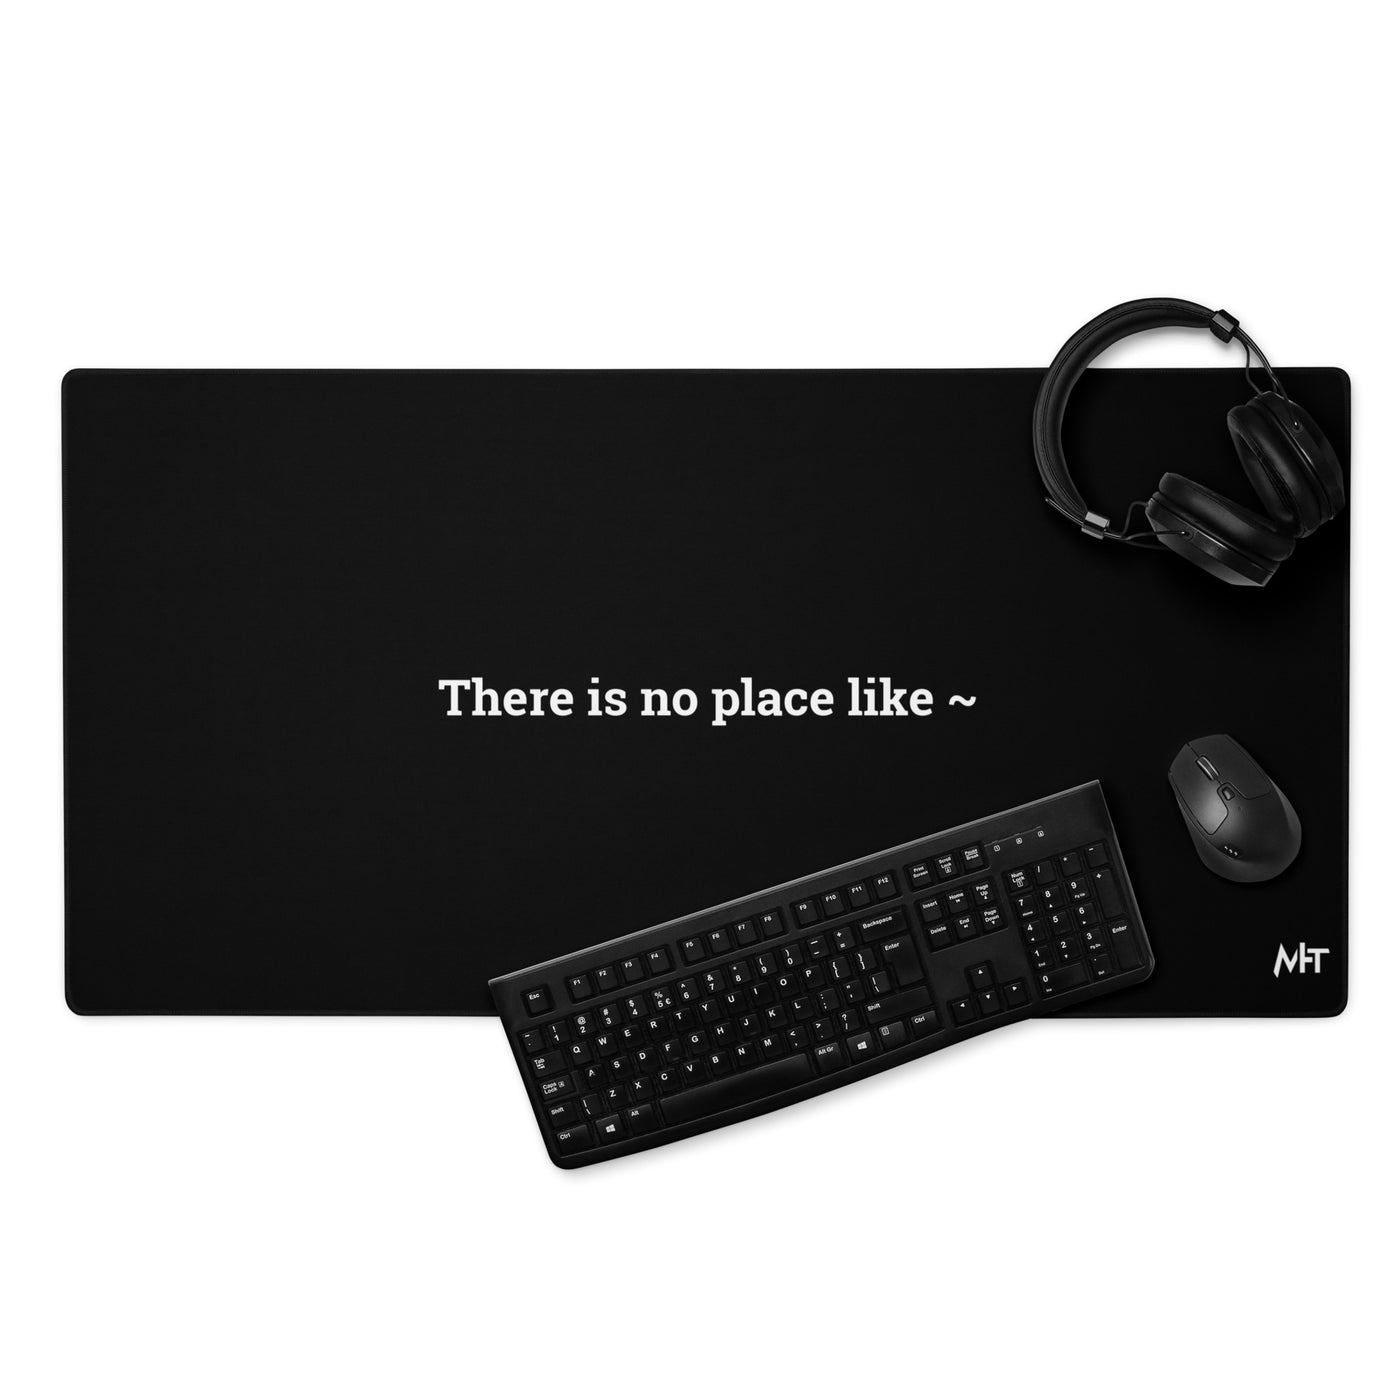 There is no Place like ~ -  Desk Mat